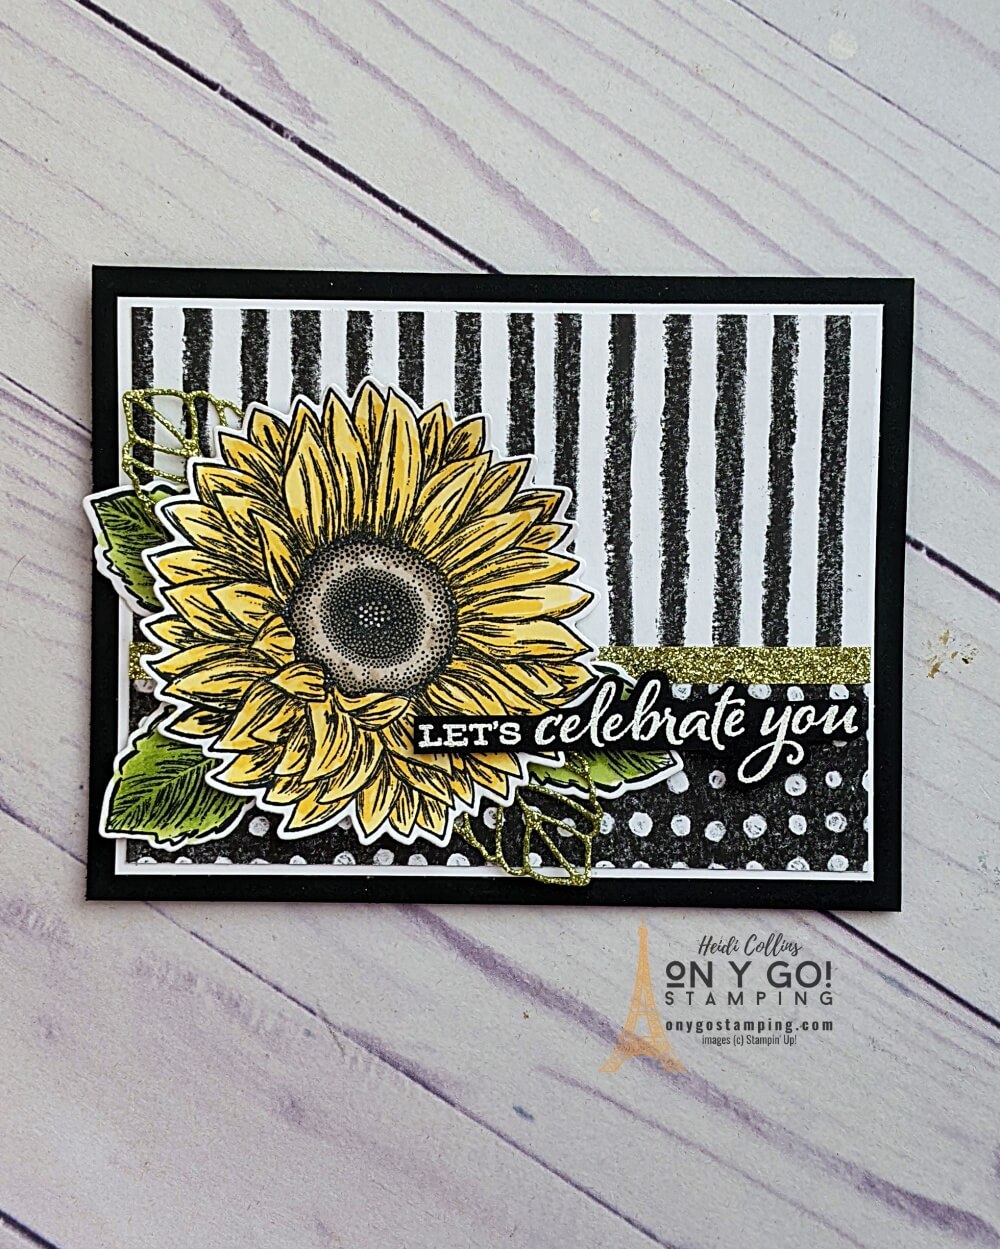 See a video tutorial on how to make this floral card for fall with glitter washi tape and patterned paper. Card design uses the Celebrate Sunflowers stamp set from Stampin' Up!®